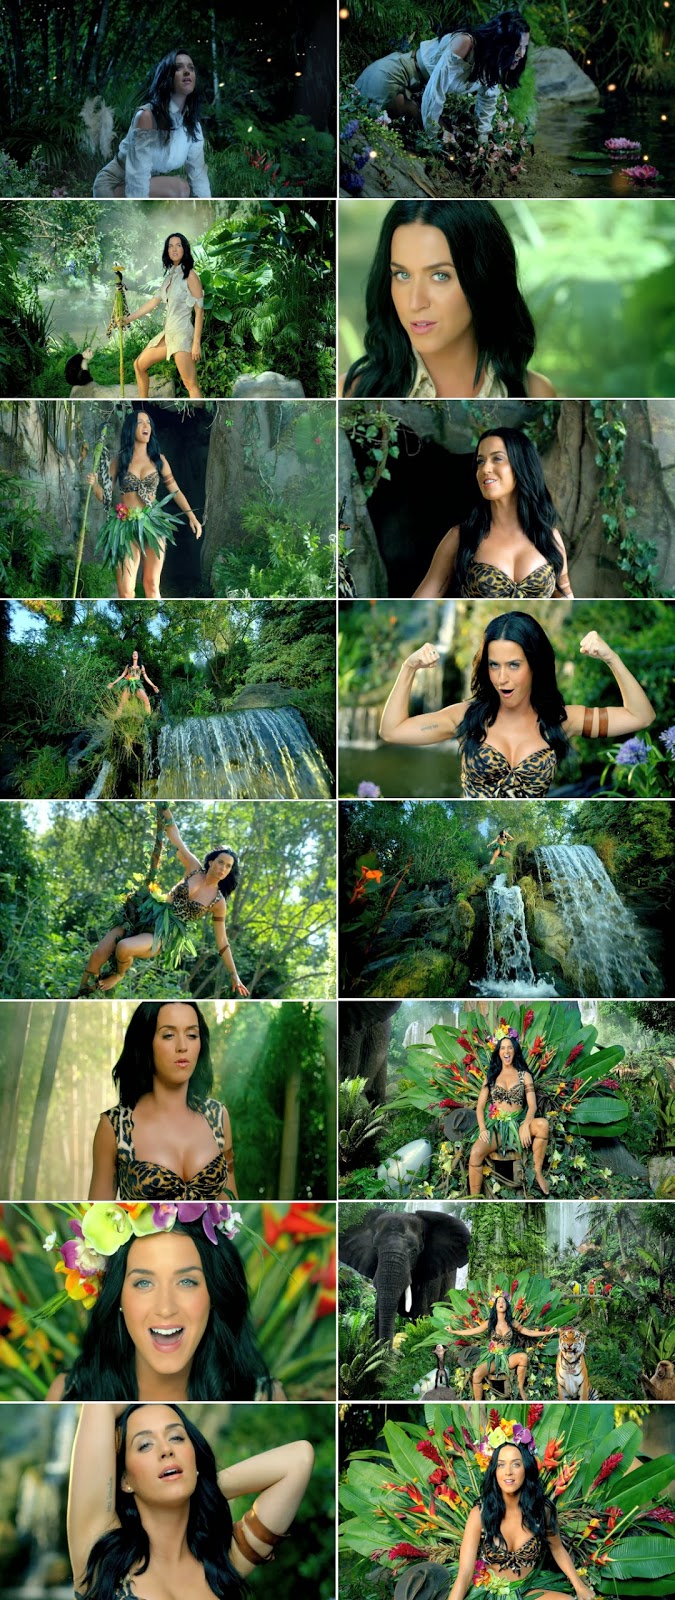 Katy Perry - Roar (2013) 1080p HD English Video Song Free Download